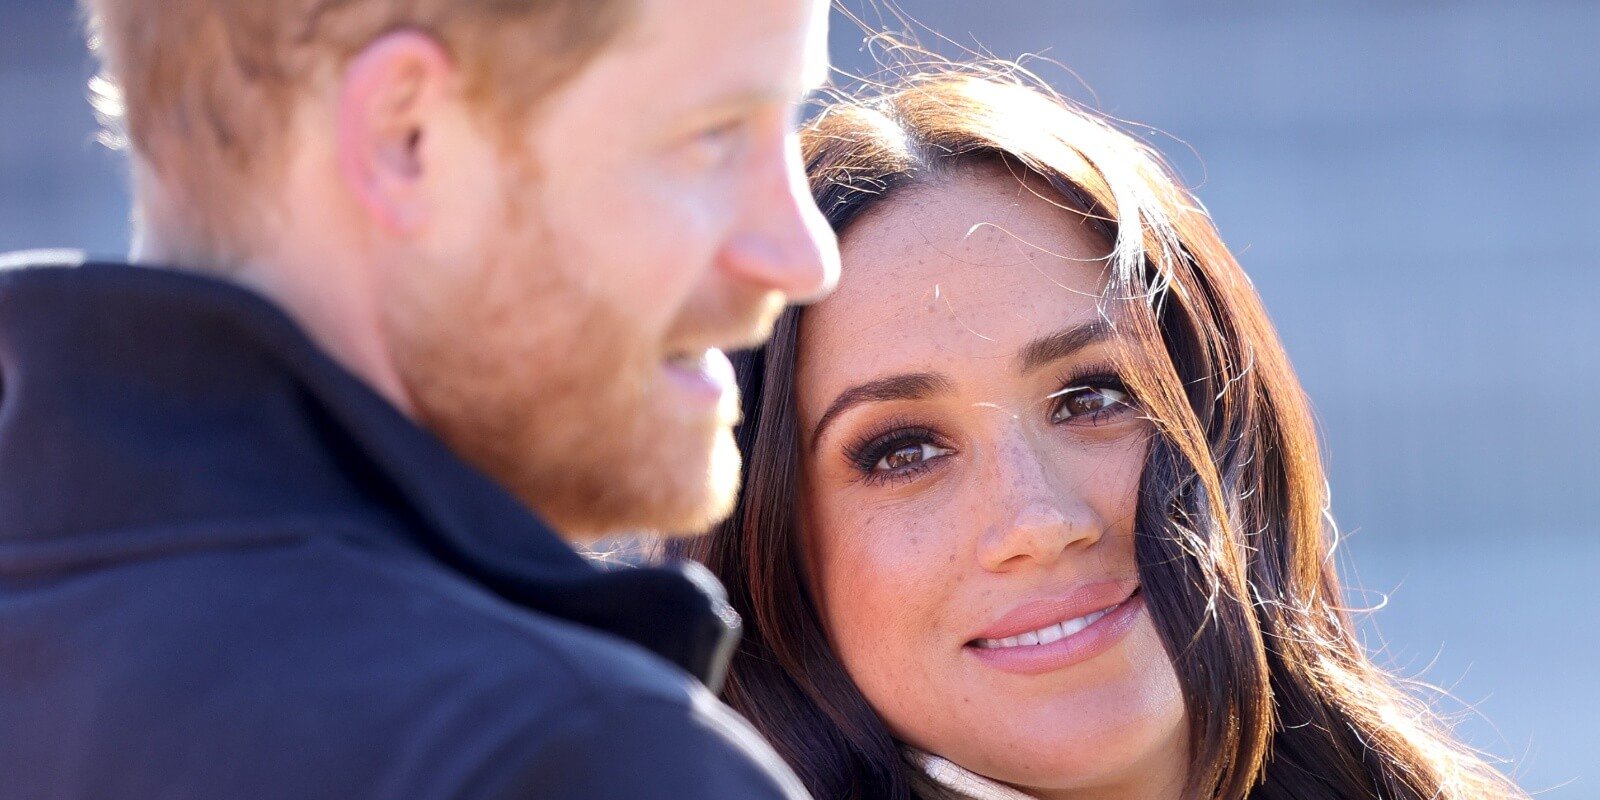 Prince Harry and Meghan Markle at the Invictus Games in 2022.